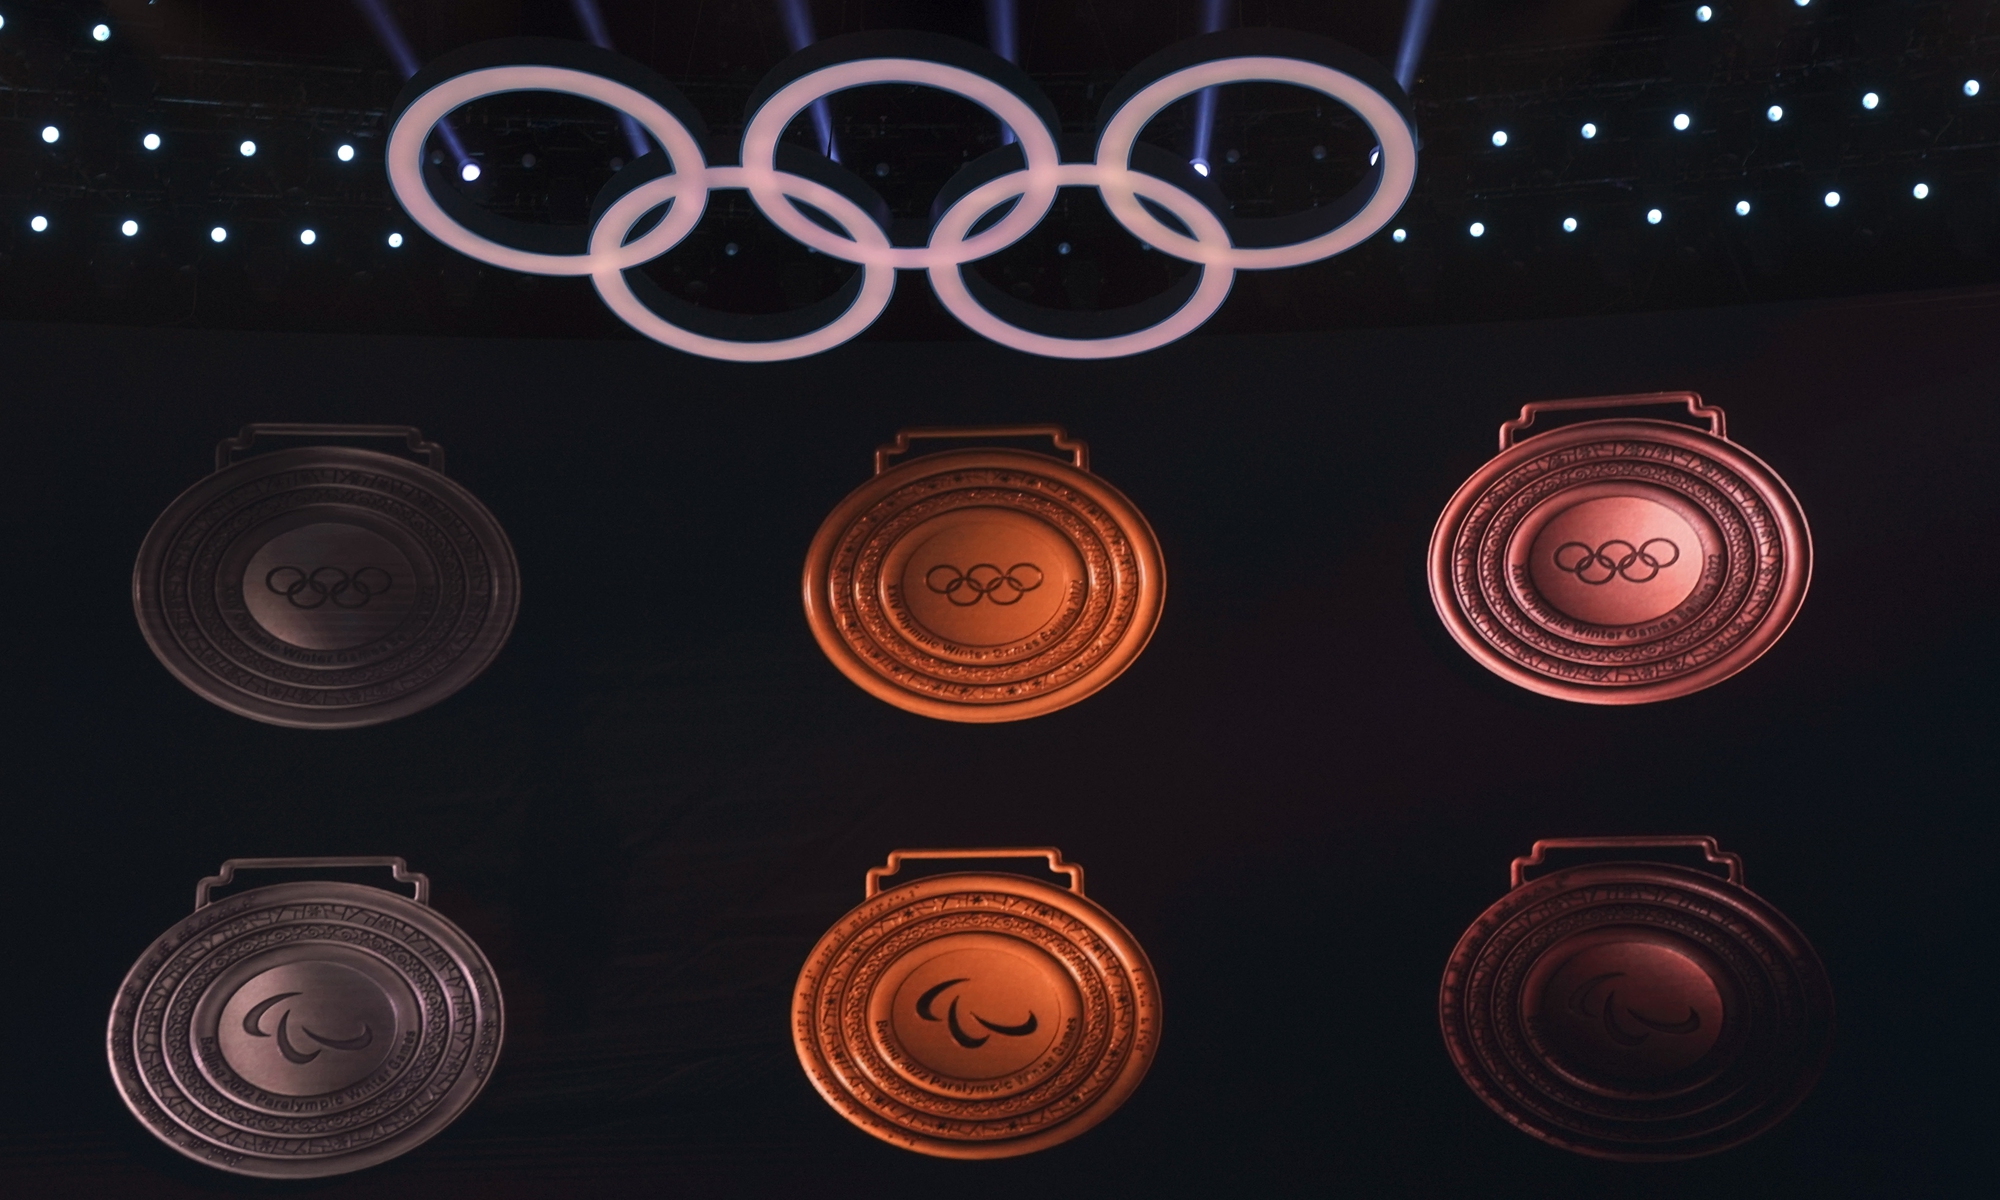 Beijing 2022 unveils the design of the medals for the 2022 Winter Olympic Games on October 26, 2021, exactly 100 days before the Games begins. Photo: Courtesy of Beijing Organising Committee for the 2022 Olympic and Paralympic Winter Games